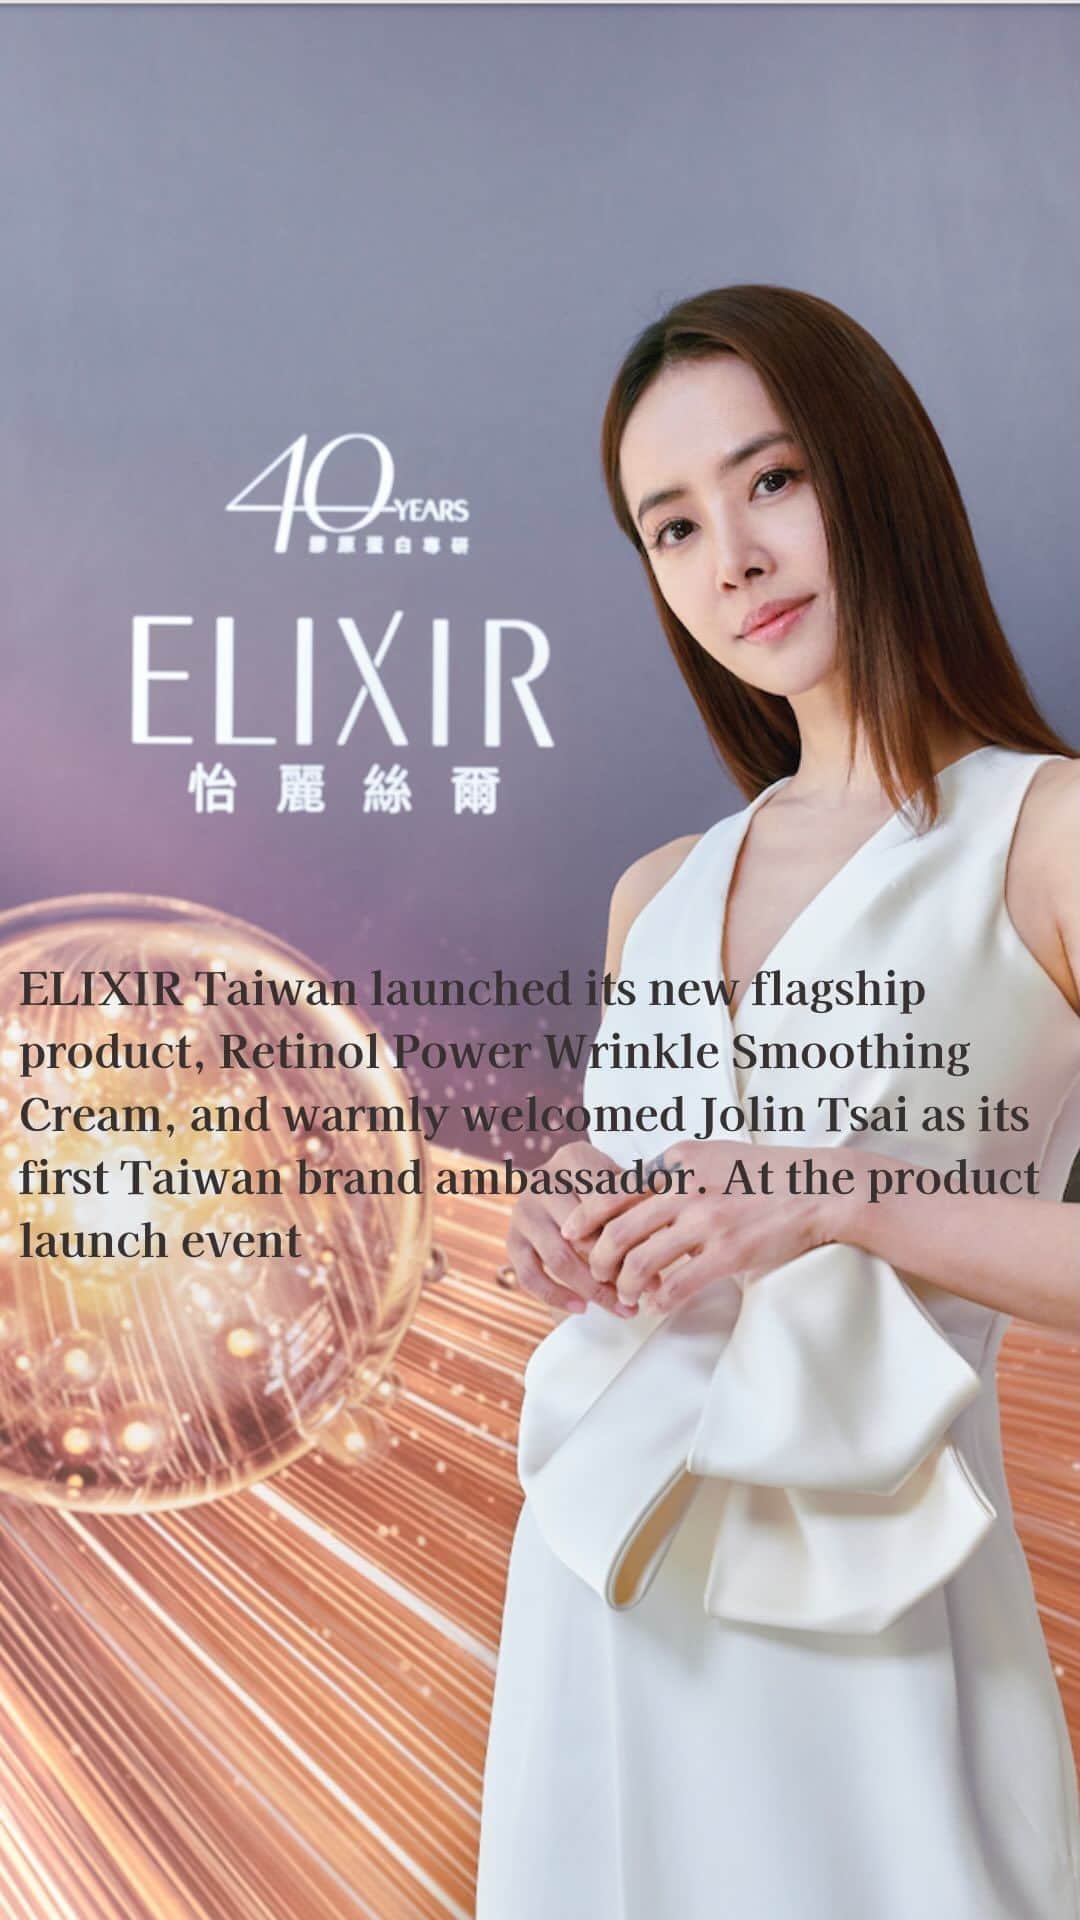 資生堂 Shiseido Group Shiseido Group Official Instagramのインスタグラム：「ELIXIR Taiwan launched its new flagship product, Retinol Power Wrinkle Smoothing Cream, and warmly welcomed Jolin Tsai (@jolin_cai ) as its first Taiwan brand ambassador.  At the product launch event, Jolin shared her tips for skincare – exercise regularly, keep healthy diet and keep only simple steps for skincare. She also showed her empathy to the slogan in the advertisement of the product: “there is no perfect life, but only a better choice.”  Let’s congratulate together to ELIXIR Taiwan to the new product launch!  台湾では、「エリクシール レチノパワー リンクルクリーム」をローンチし、エリクシールにとって台湾初のブランドアンバサダーとして蔡依林（Jolin Tsai）を温かく迎えました。  商品ローンチイベントでは、Jolinがご自身のスキンケアのTips「定期的な運動、健康的な食事、そしてシンプルなスキンケアの手順」を紹介。 また、商品の広告スローガンである「完璧な人生はない、ただより良い選択肢のみ」への共感も示してくれました。  エリクシール台湾の新商品ローンチを共に祝いましょう！   #elixir #elixirtaiwan #beautyinnovationsforabetterworld #資生堂」